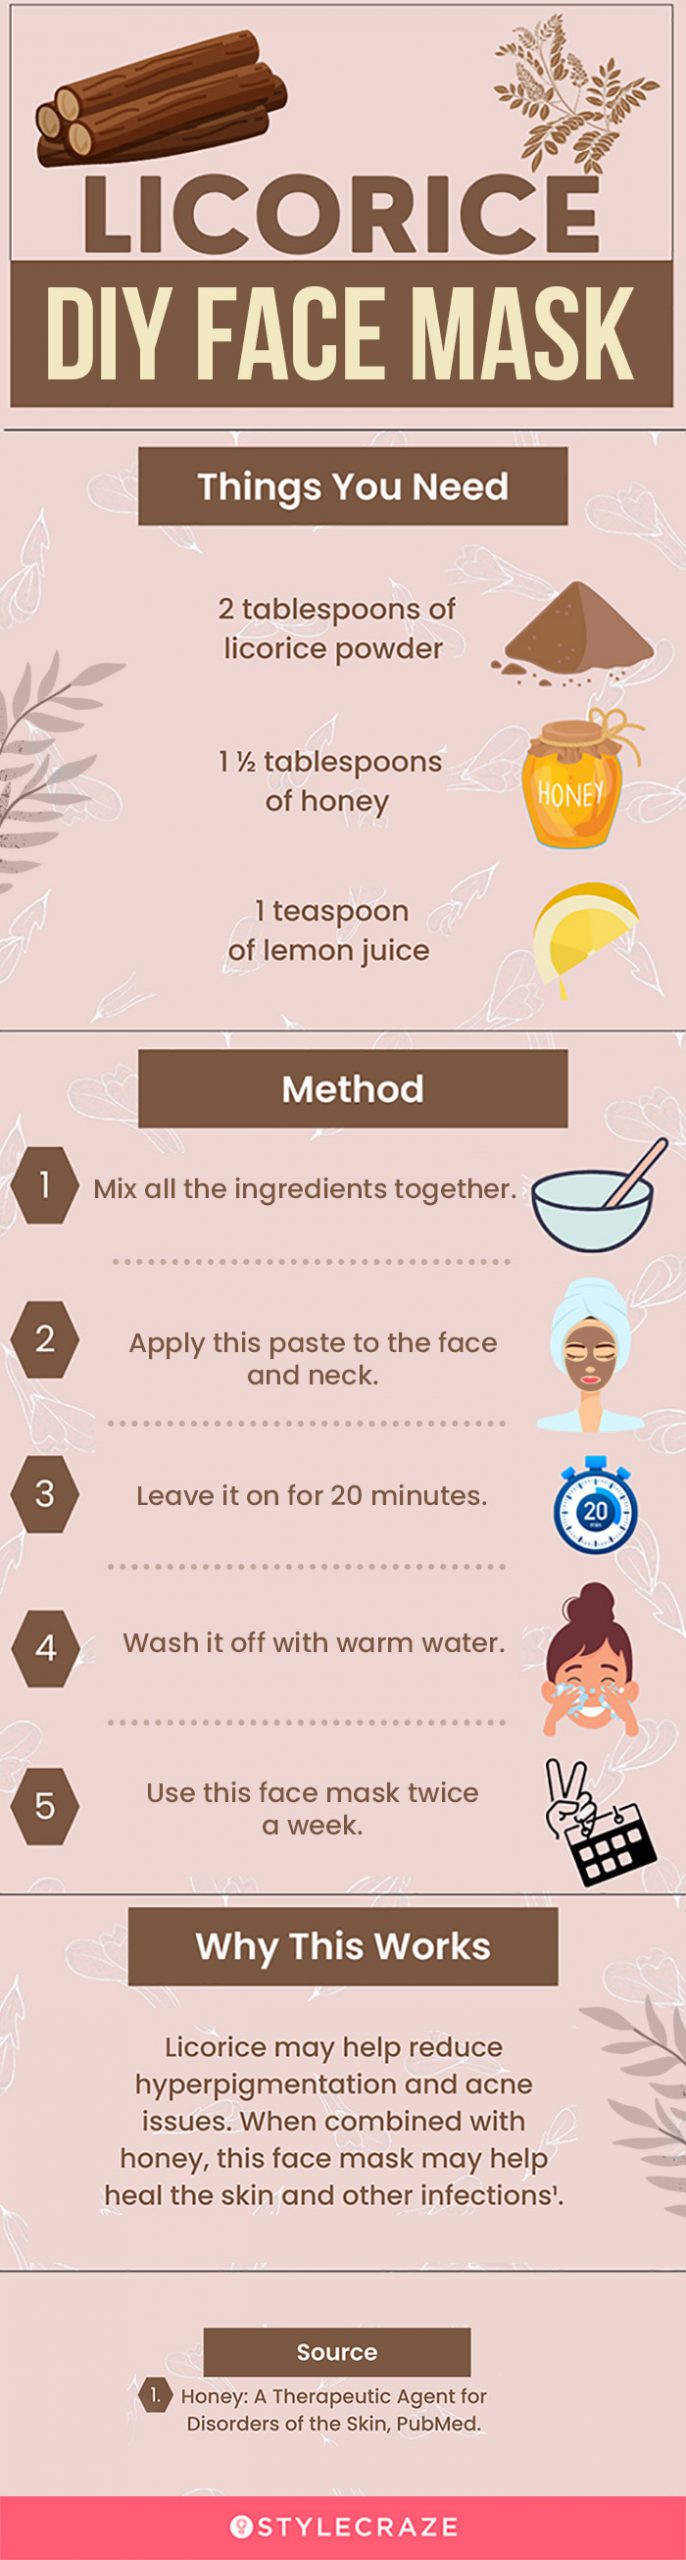 licorice diy face mask (infographic)